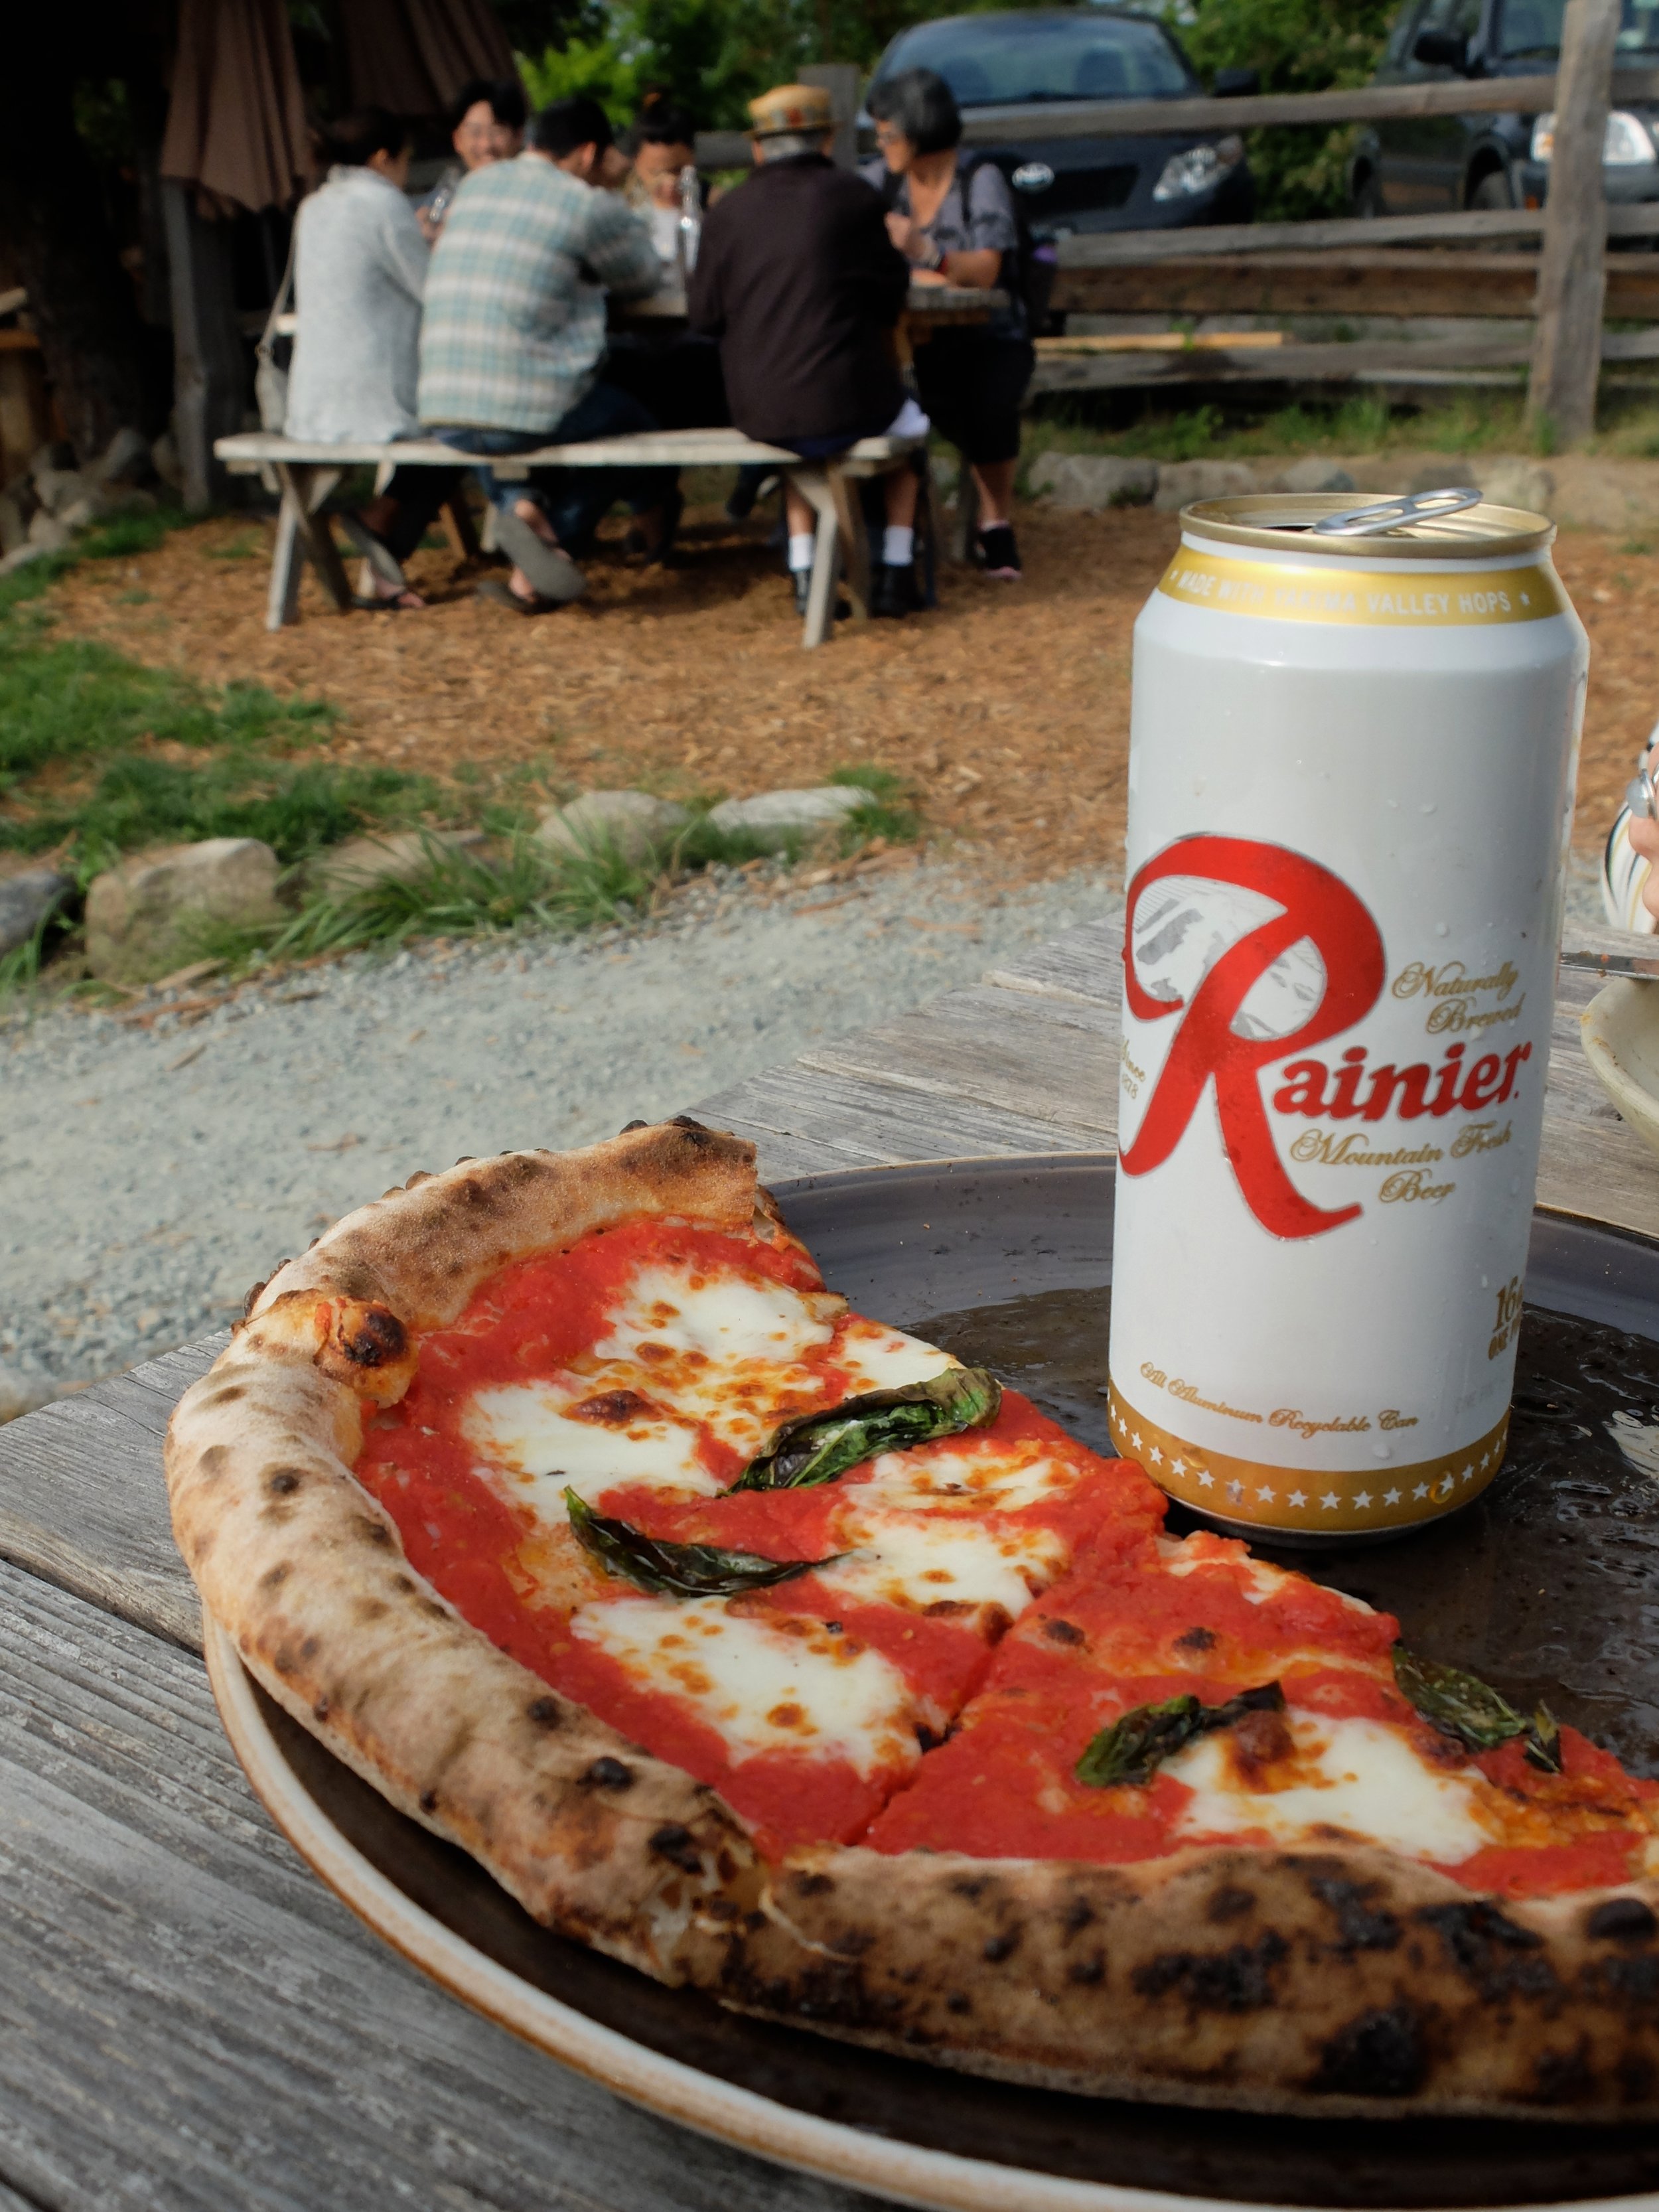  Hogstone's Wood Oven, Eastsound, Orcas Island, WA - This was the least satisfying meal of the trip.&nbsp; Pizza not spectacular and they were out of the draft beer that had looked intriguing.&nbsp; But, I got to take a foto of a Rainier beer can.&nb